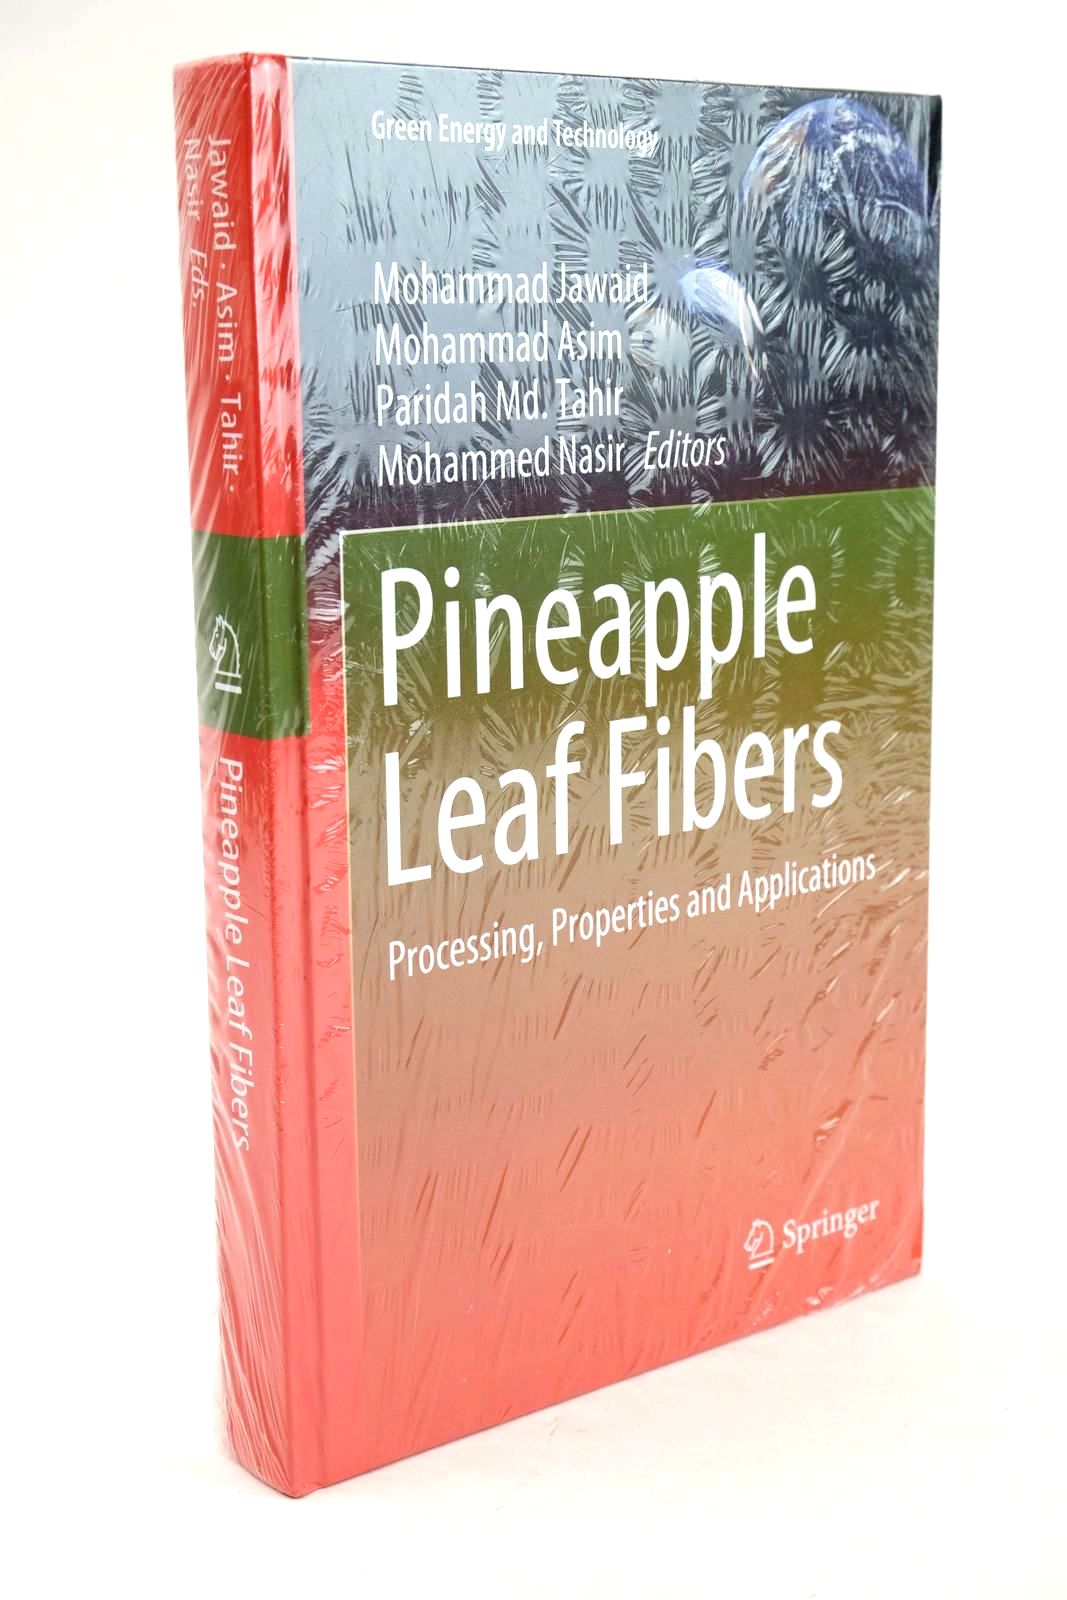 Photo of PINEAPPLE LEAF FIBERS PROCESSING, PROPERTIES AND APPLICATIONS written by Jawaid, Mohammad Asim, Mohammad Tahir, Paridah Md. Nasir, Mohammed published by Springer (STOCK CODE: 1324146)  for sale by Stella & Rose's Books